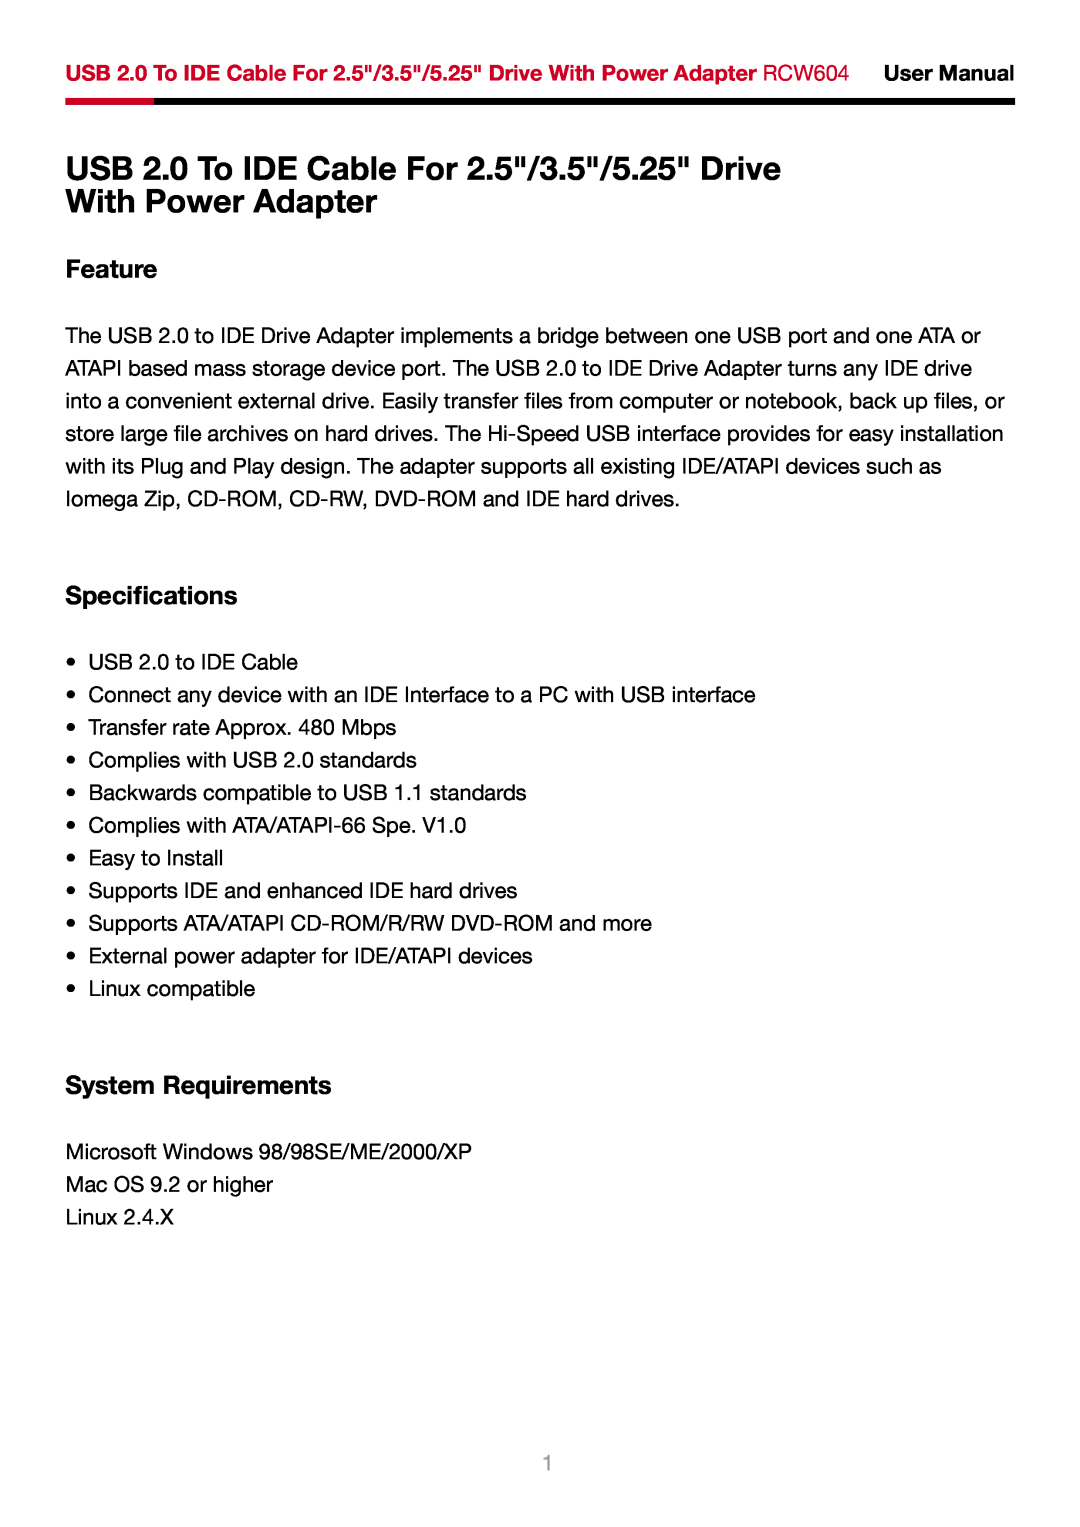 Rosewill RCW604 user manual Feature, Specifications, System Requirements 